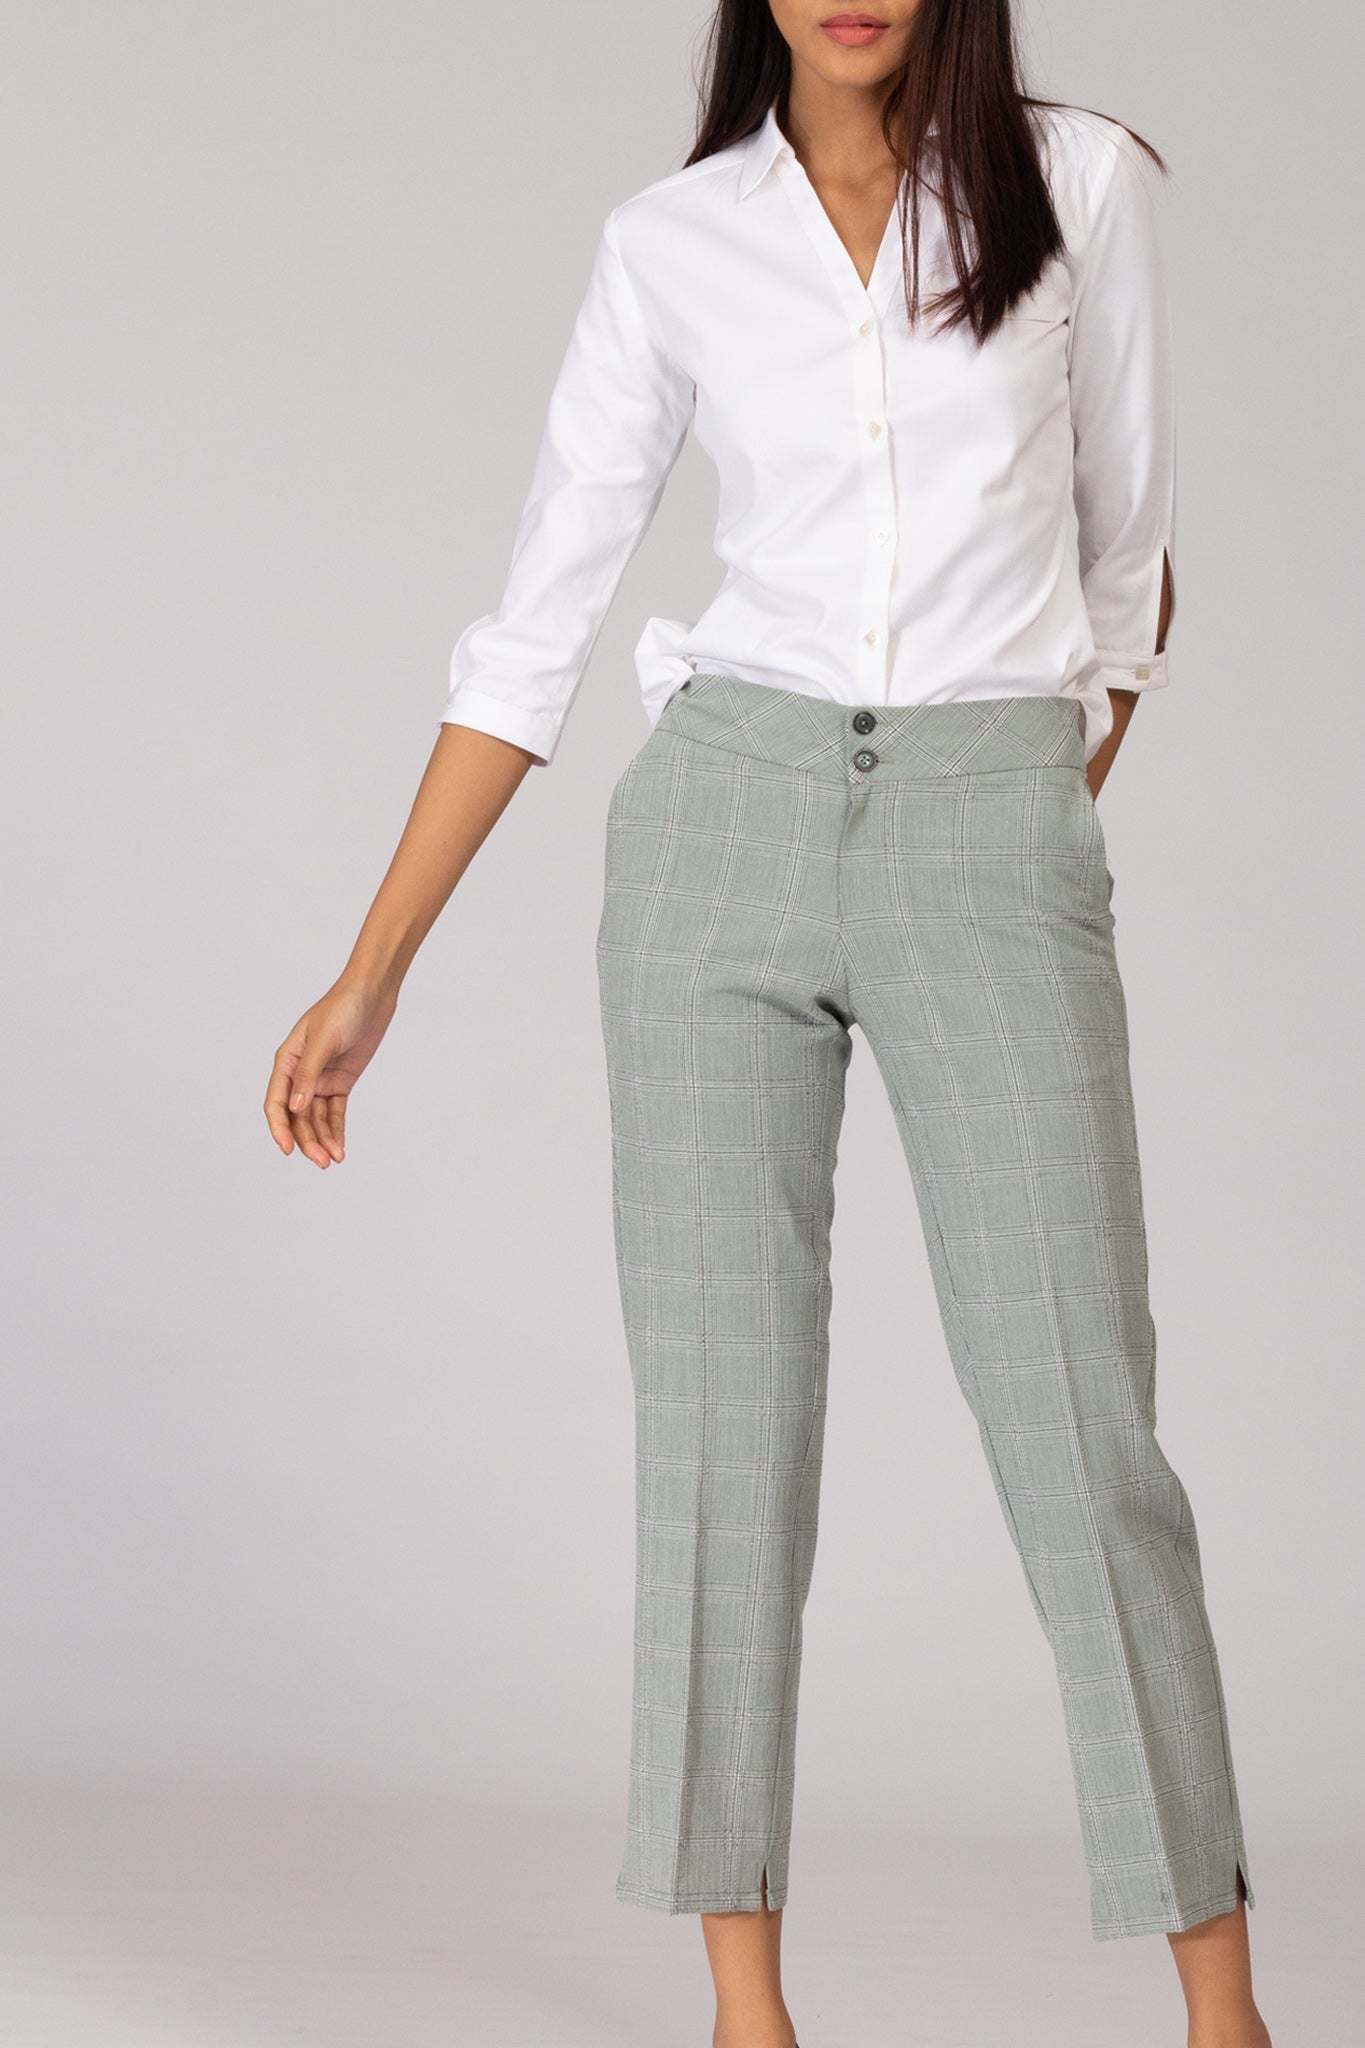 Falls most fashionable pant slightly above the waist wideleg trouser in  an irresistible Donegal herring  Fall outfits for work Work attire women  Work outfit